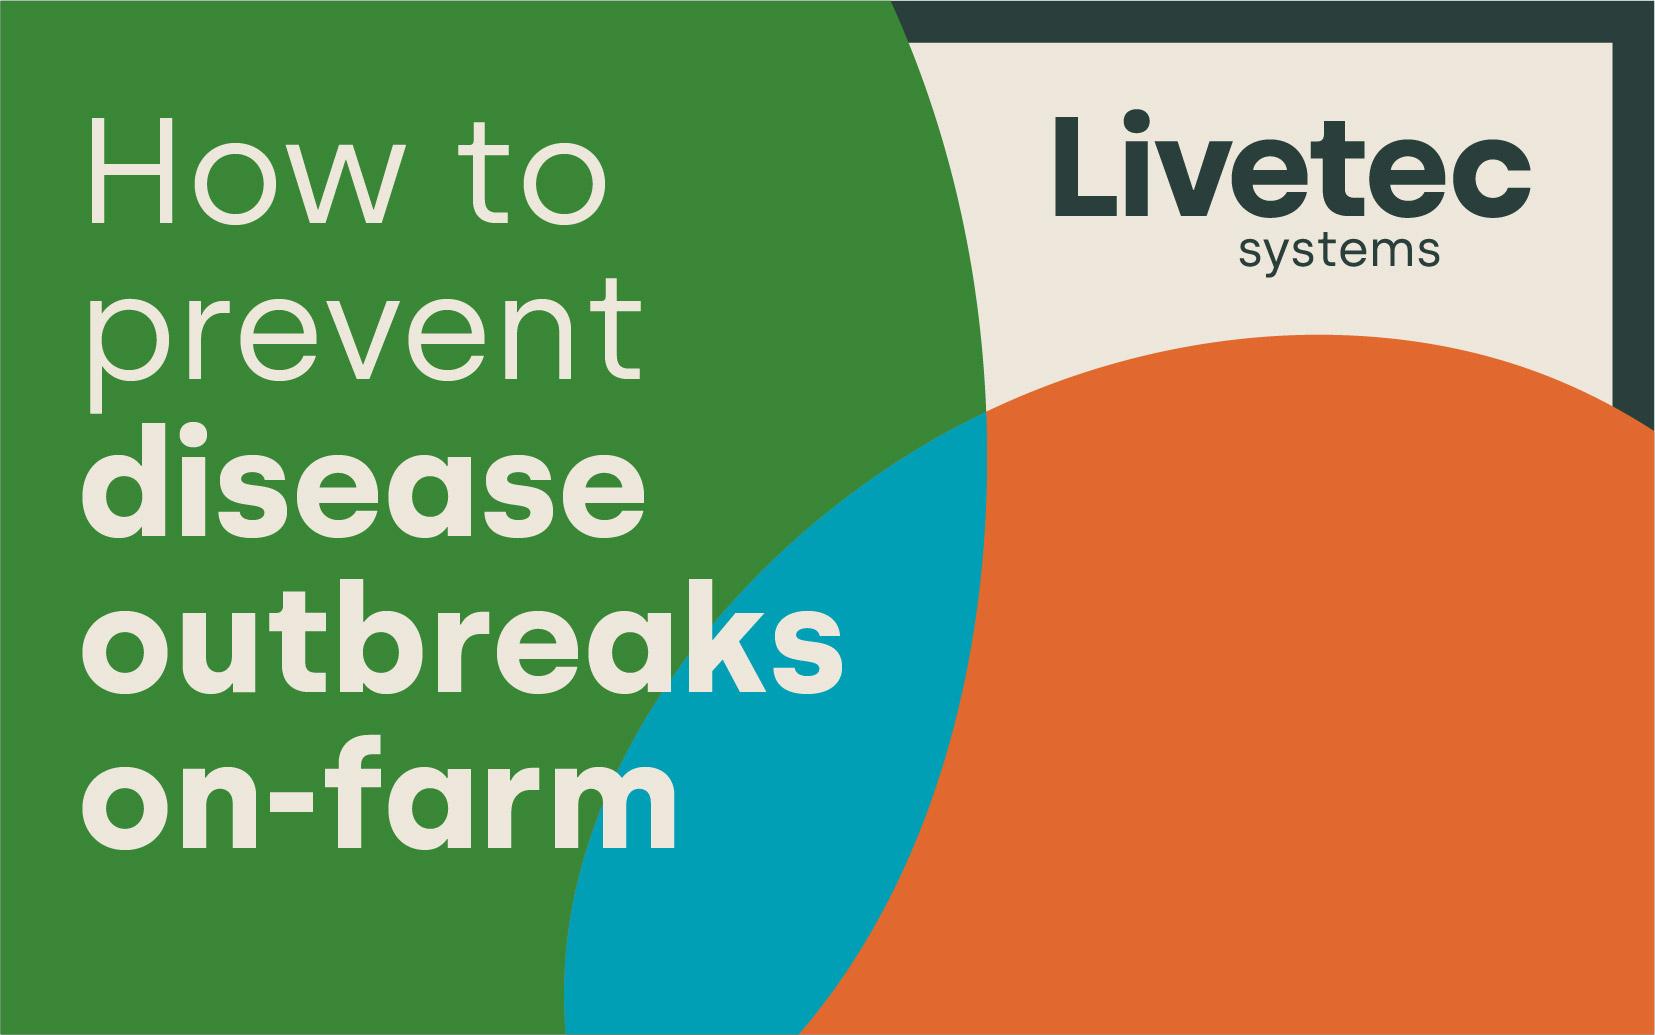 How to prevent a disease outbreak on-farm